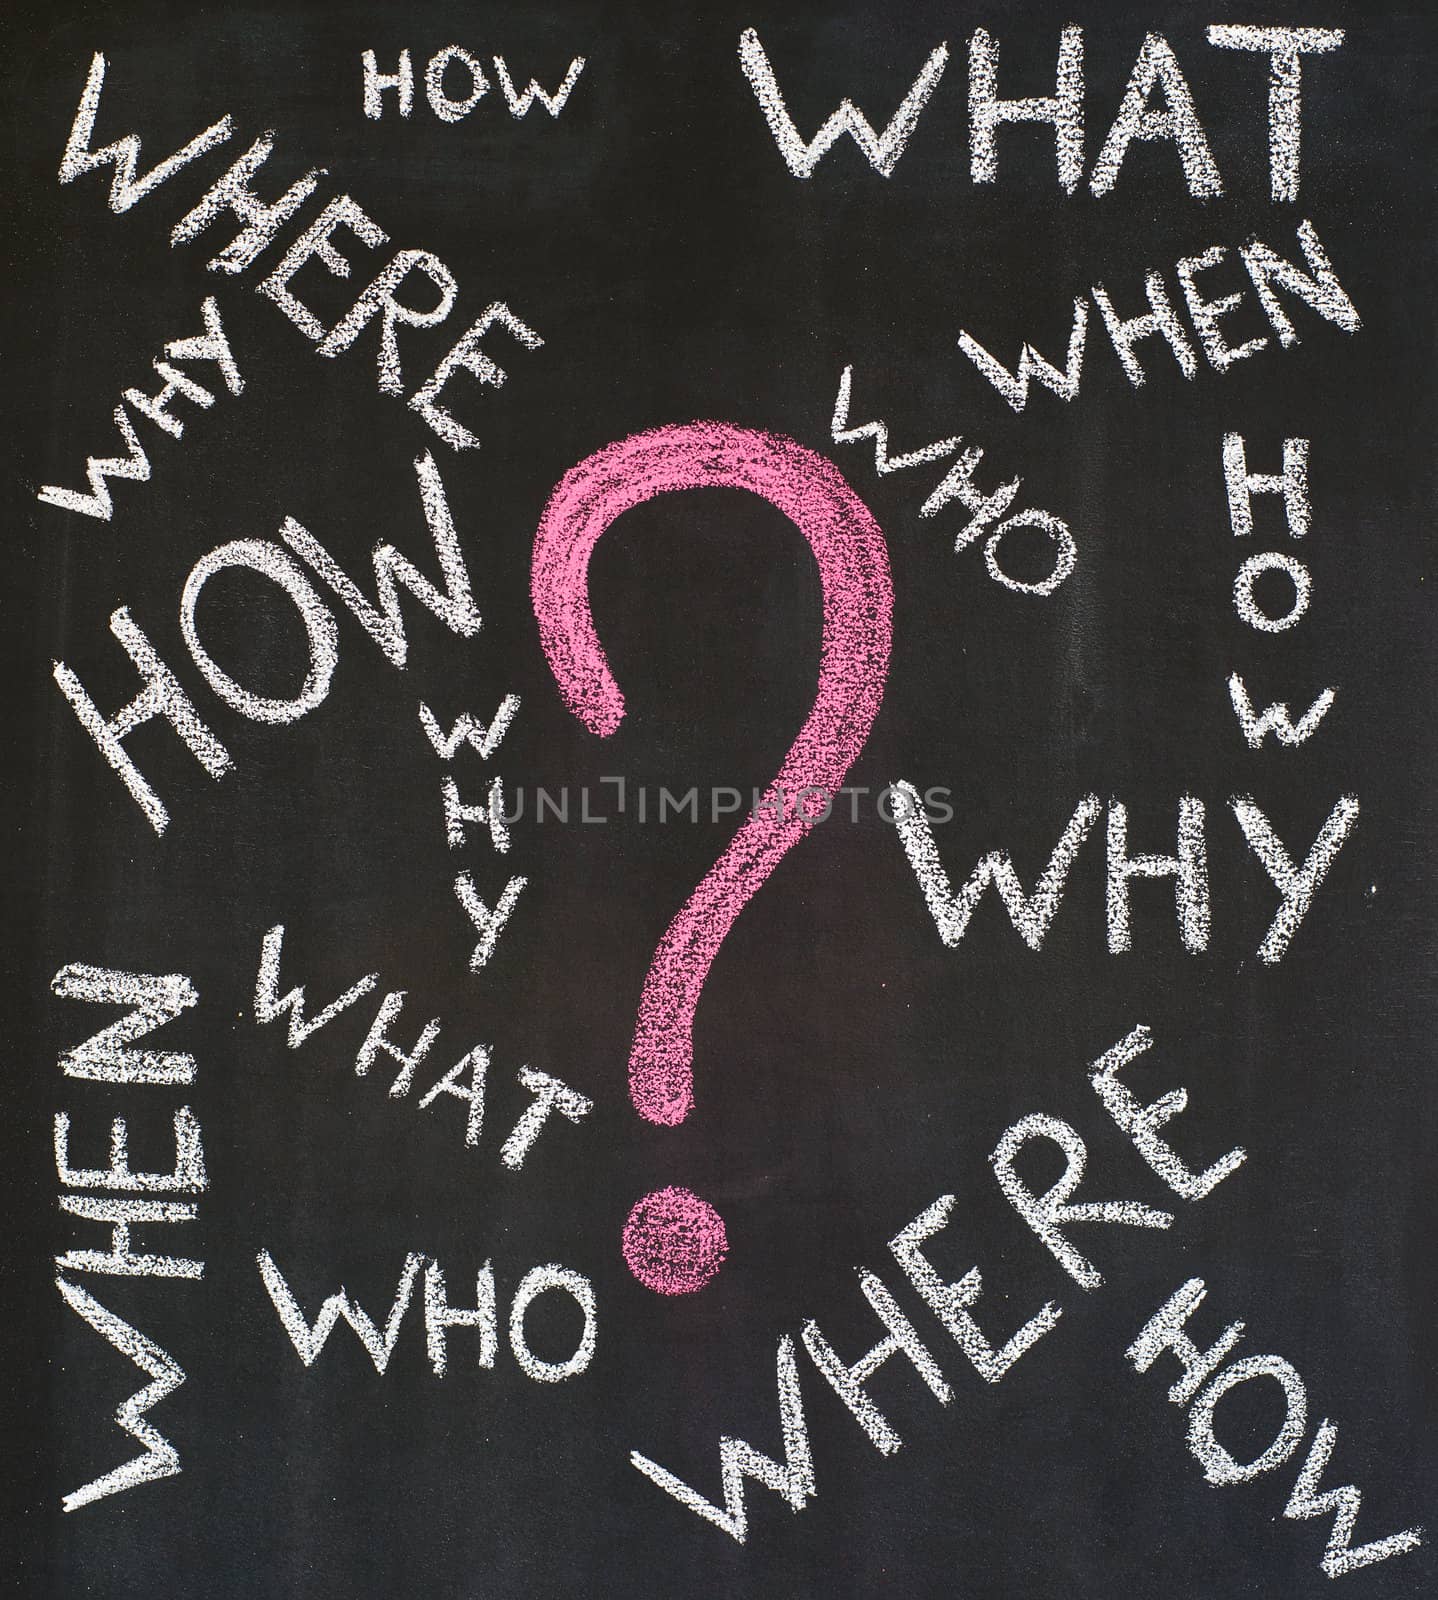 Frequently asked questions handwritten on a blackboard